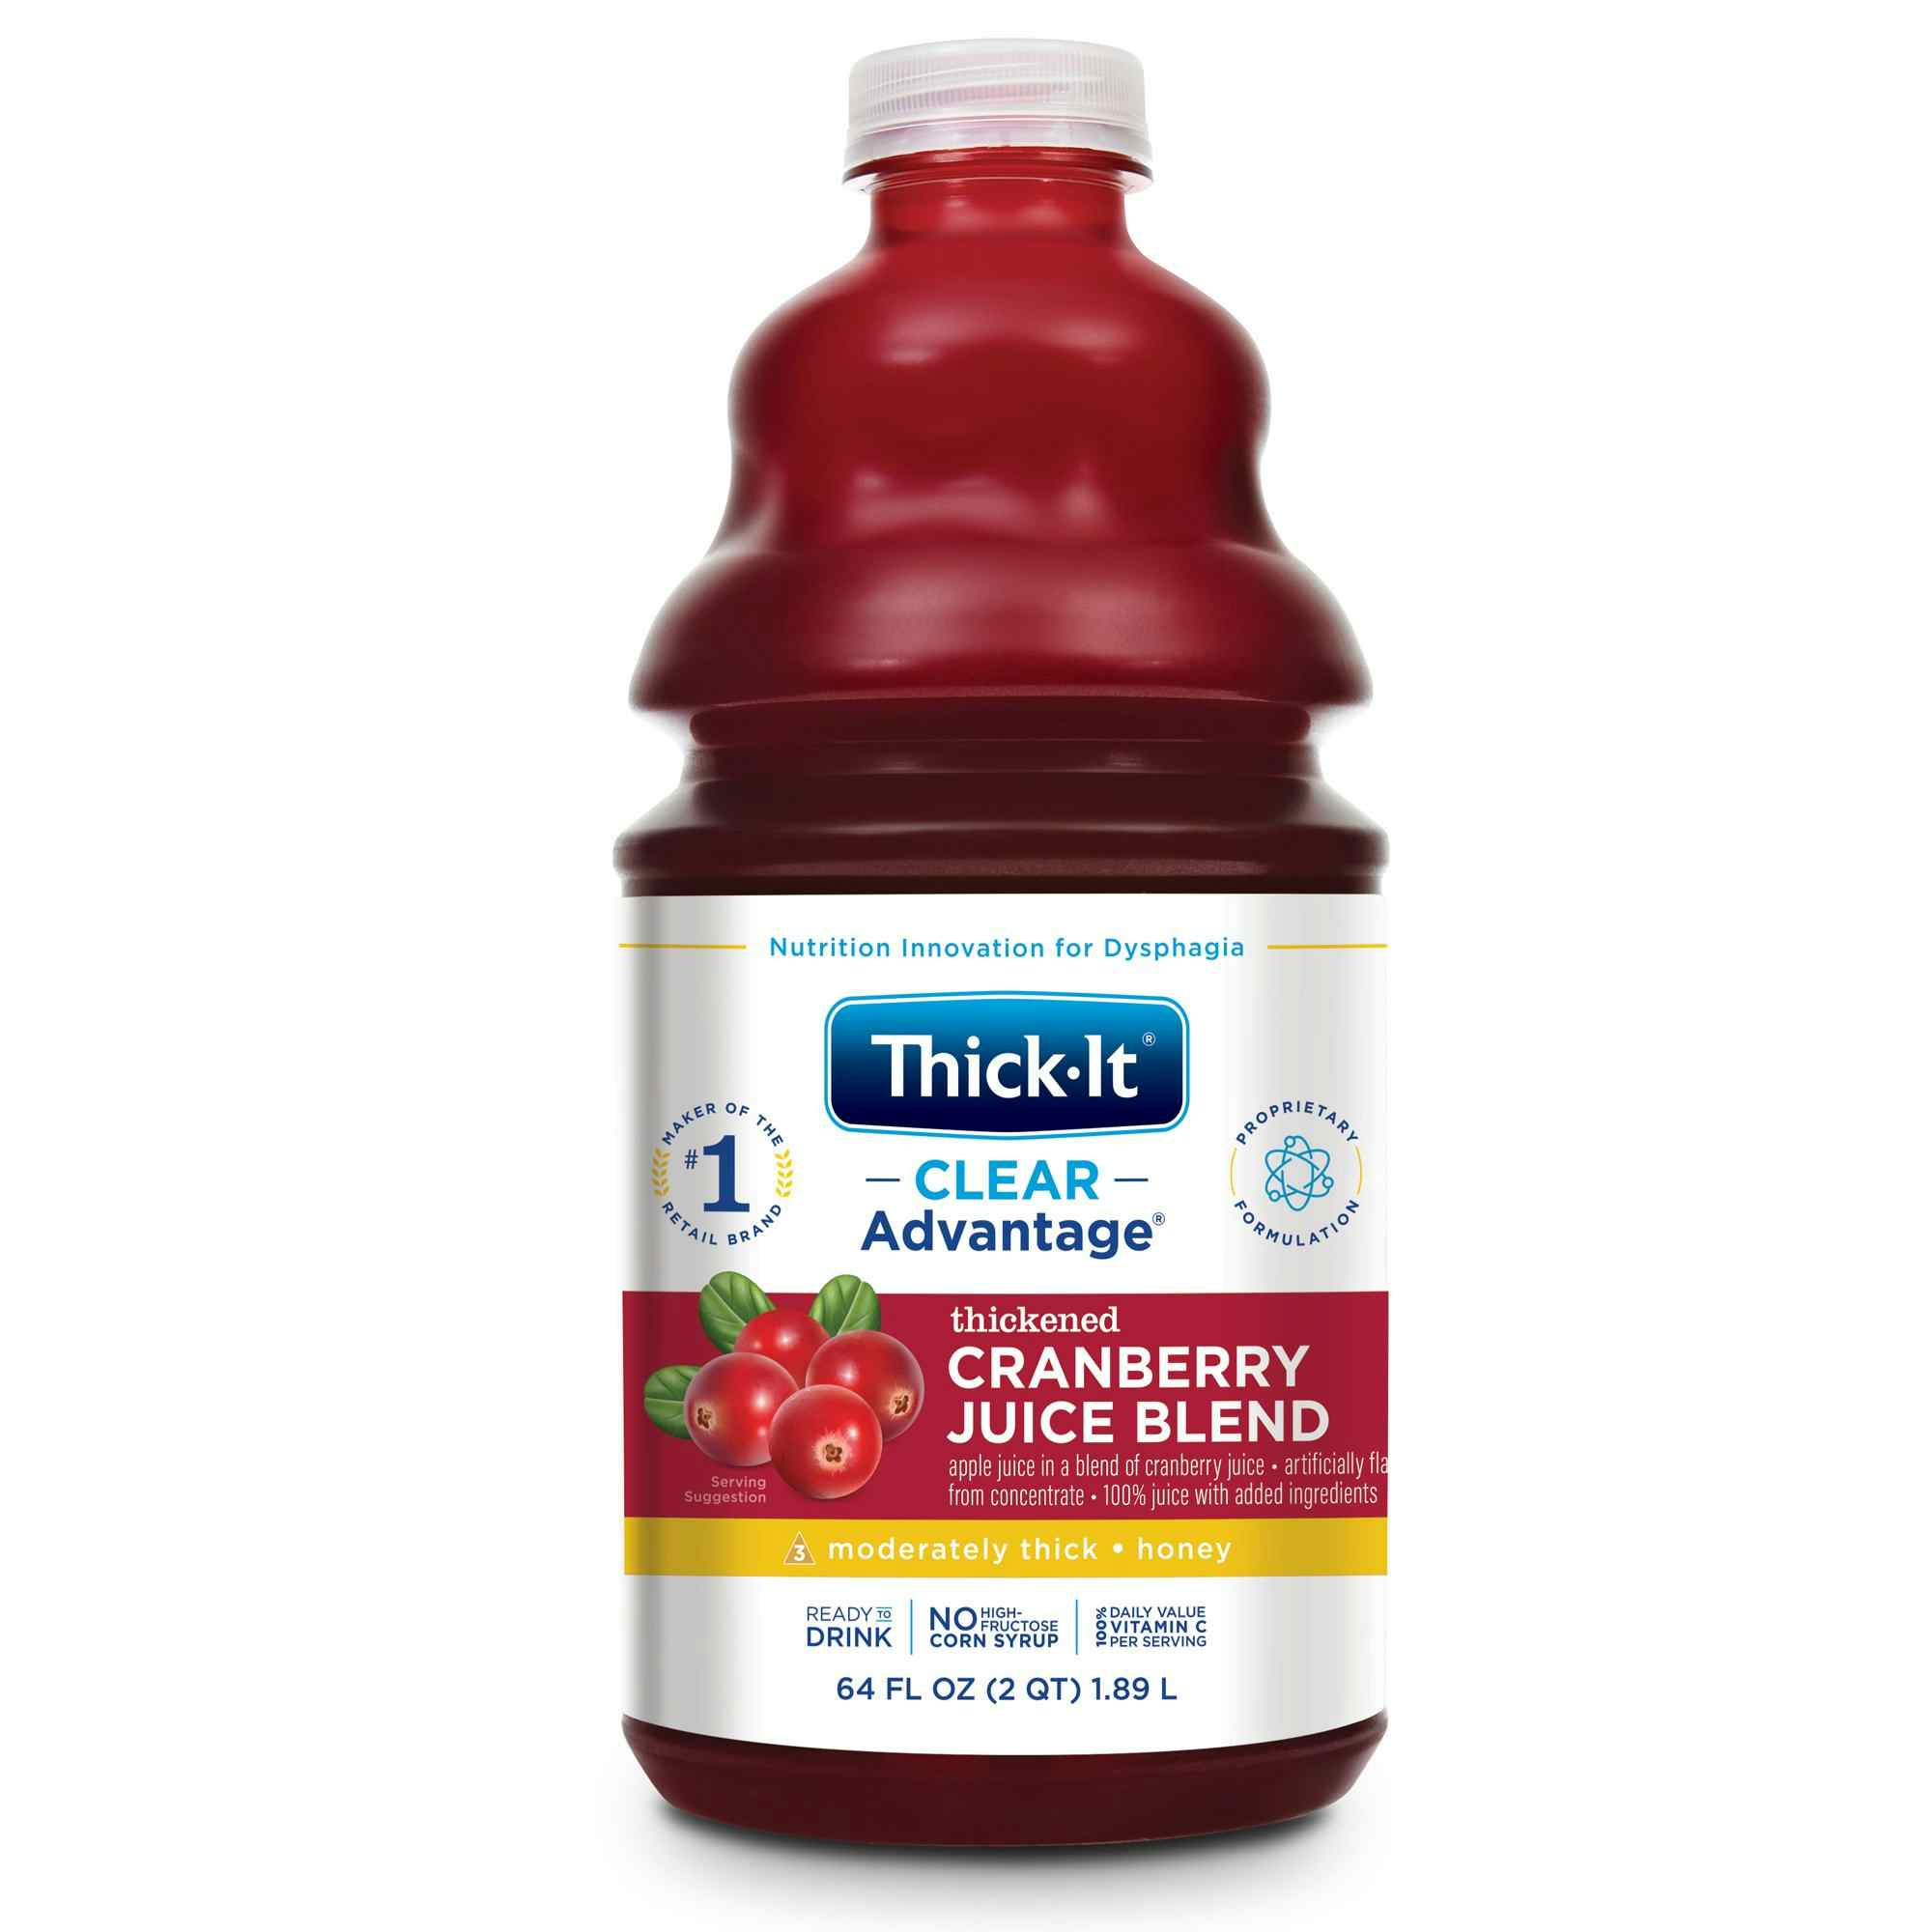 Thick-It Clear Advantage Thickened Cranberry Juice Blend, Moderately Thick, Honey Consistency, B460-A5044, 64 oz. - Case of 4